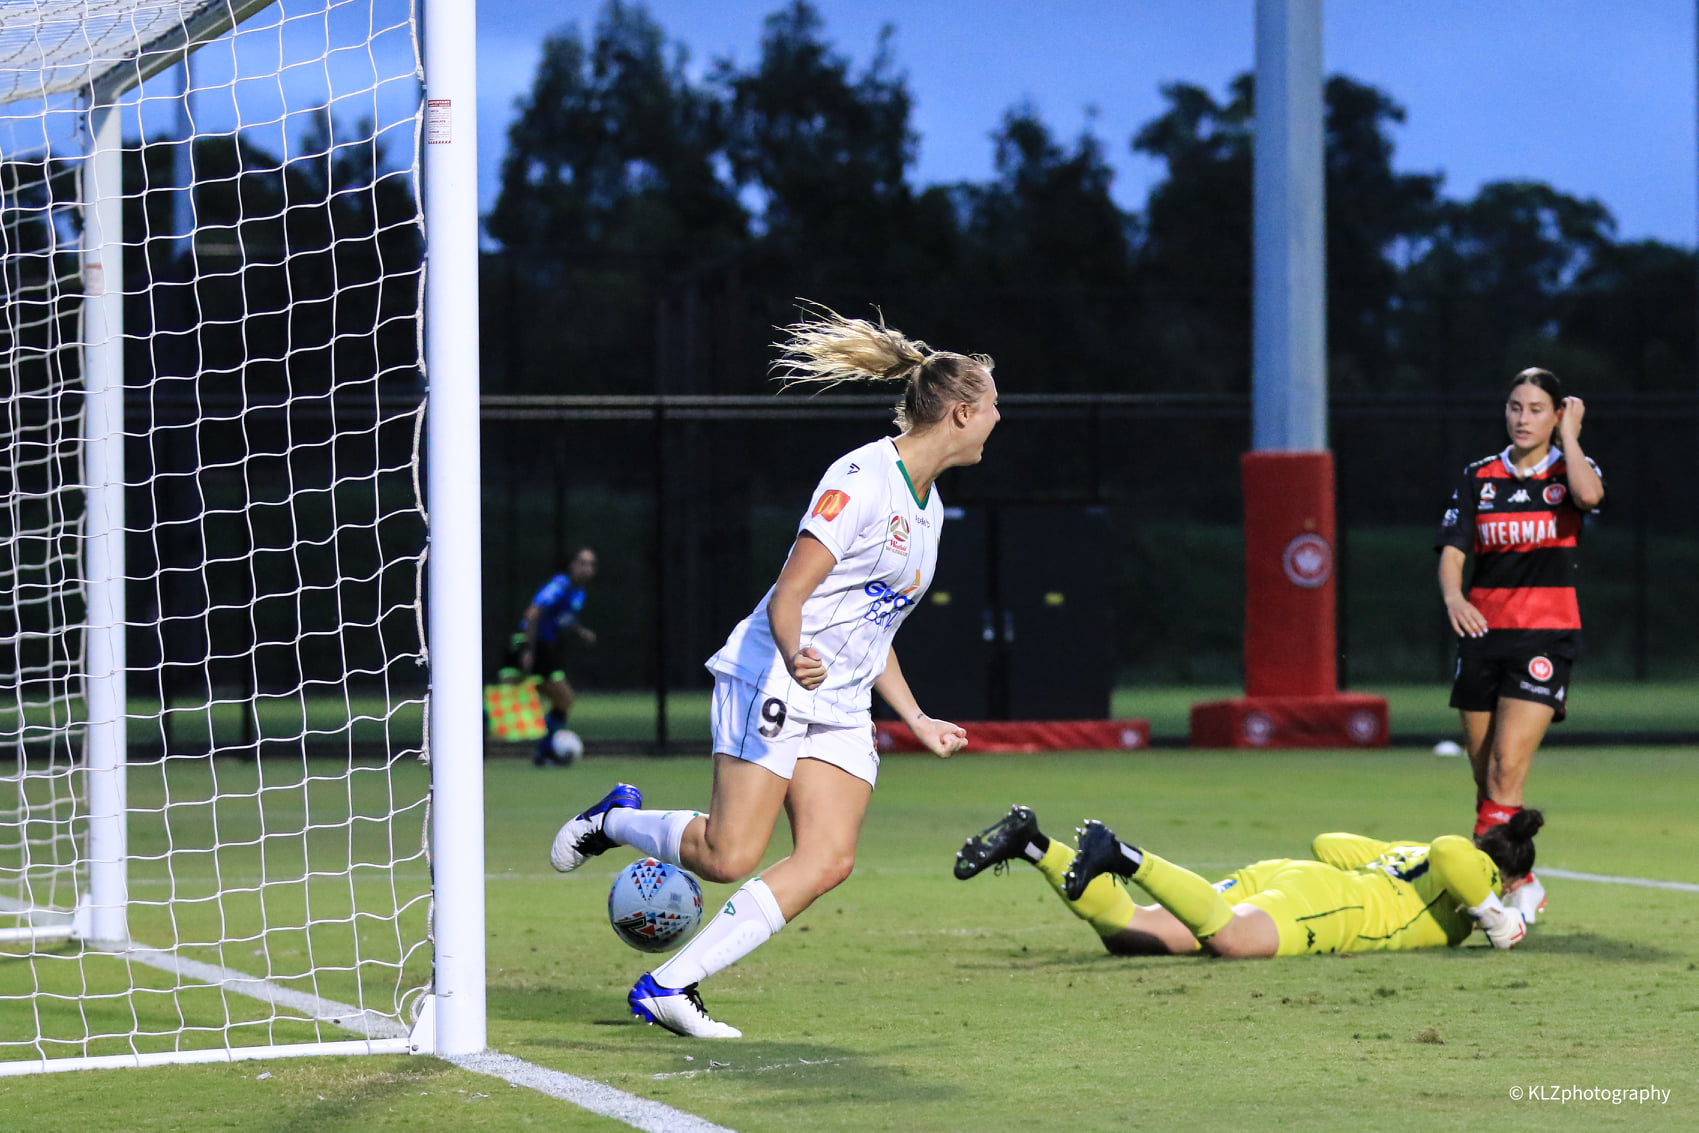 Tara Andrews celebrates scoring for Newcastle Jets against Western Sydney Wanderers, in a game played at Wanderers Football Park during the 2020-21 A-League Women season. Photo credit: Kellie Lemon / KLZ Photography